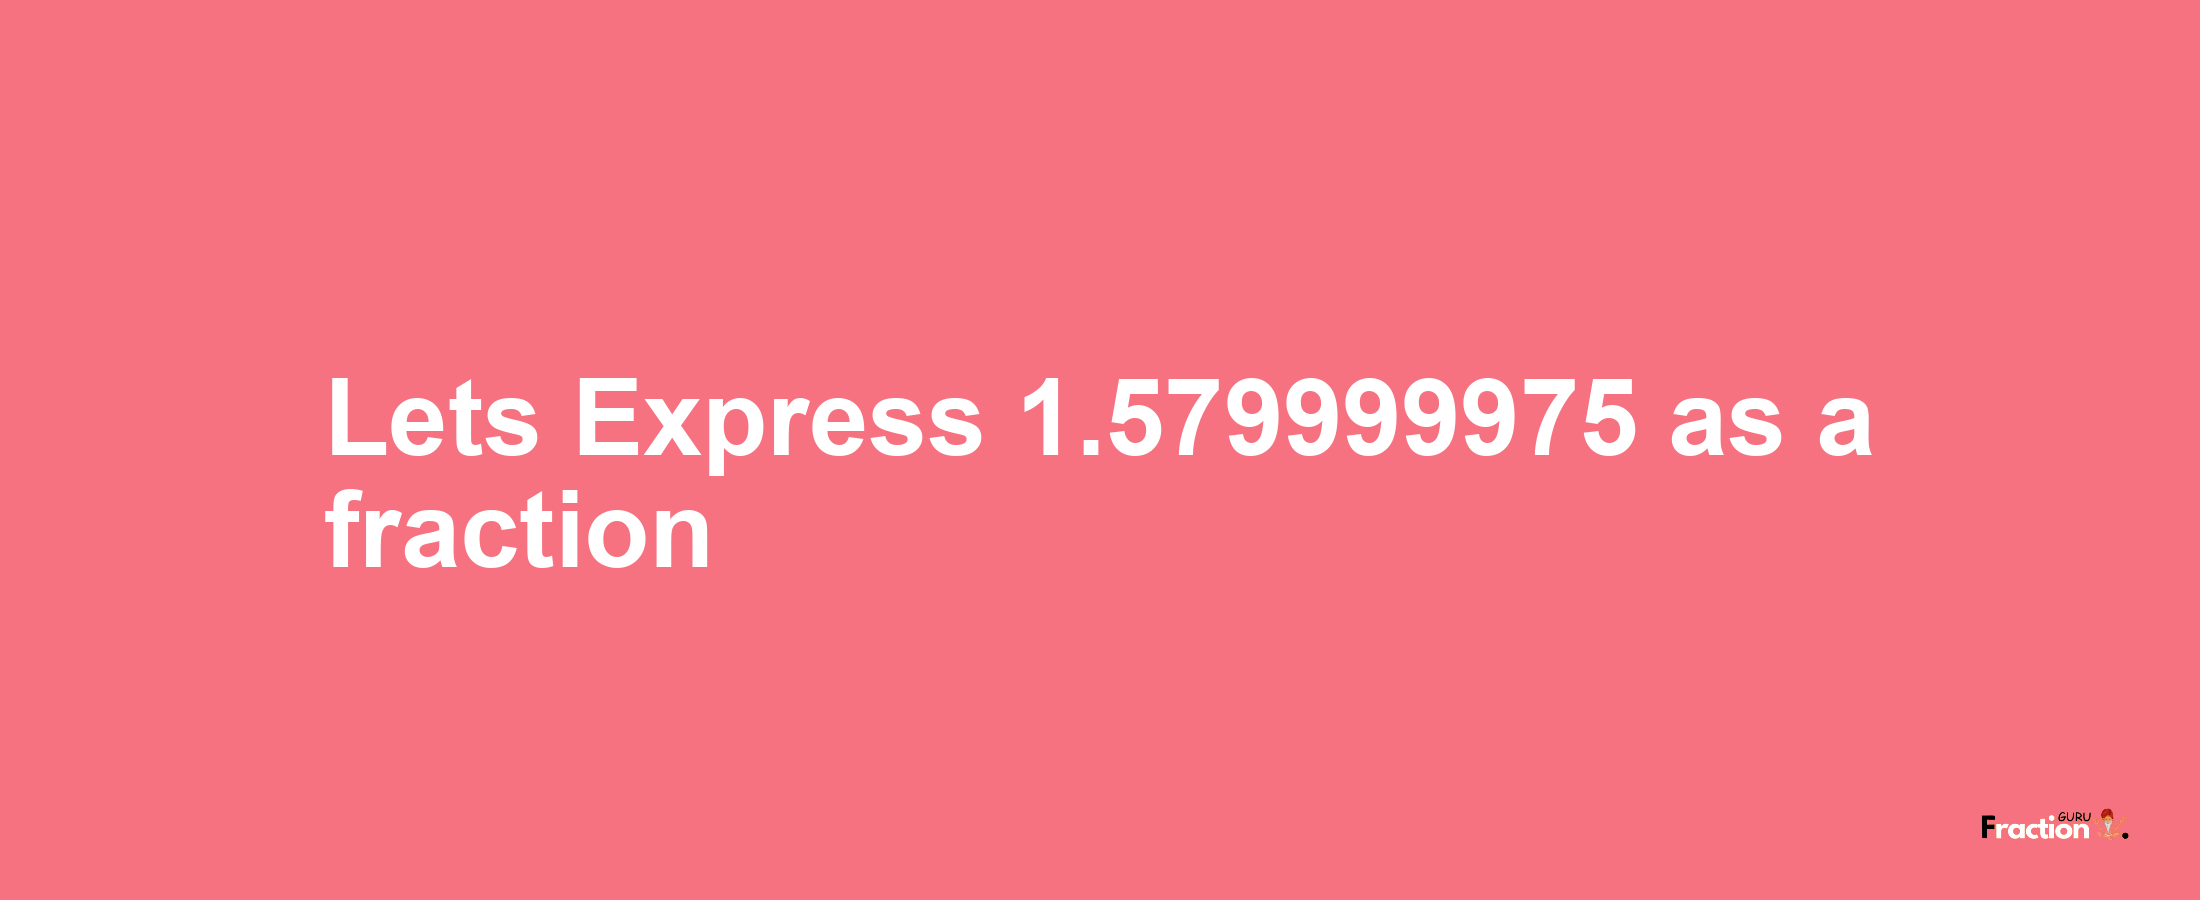 Lets Express 1.579999975 as afraction